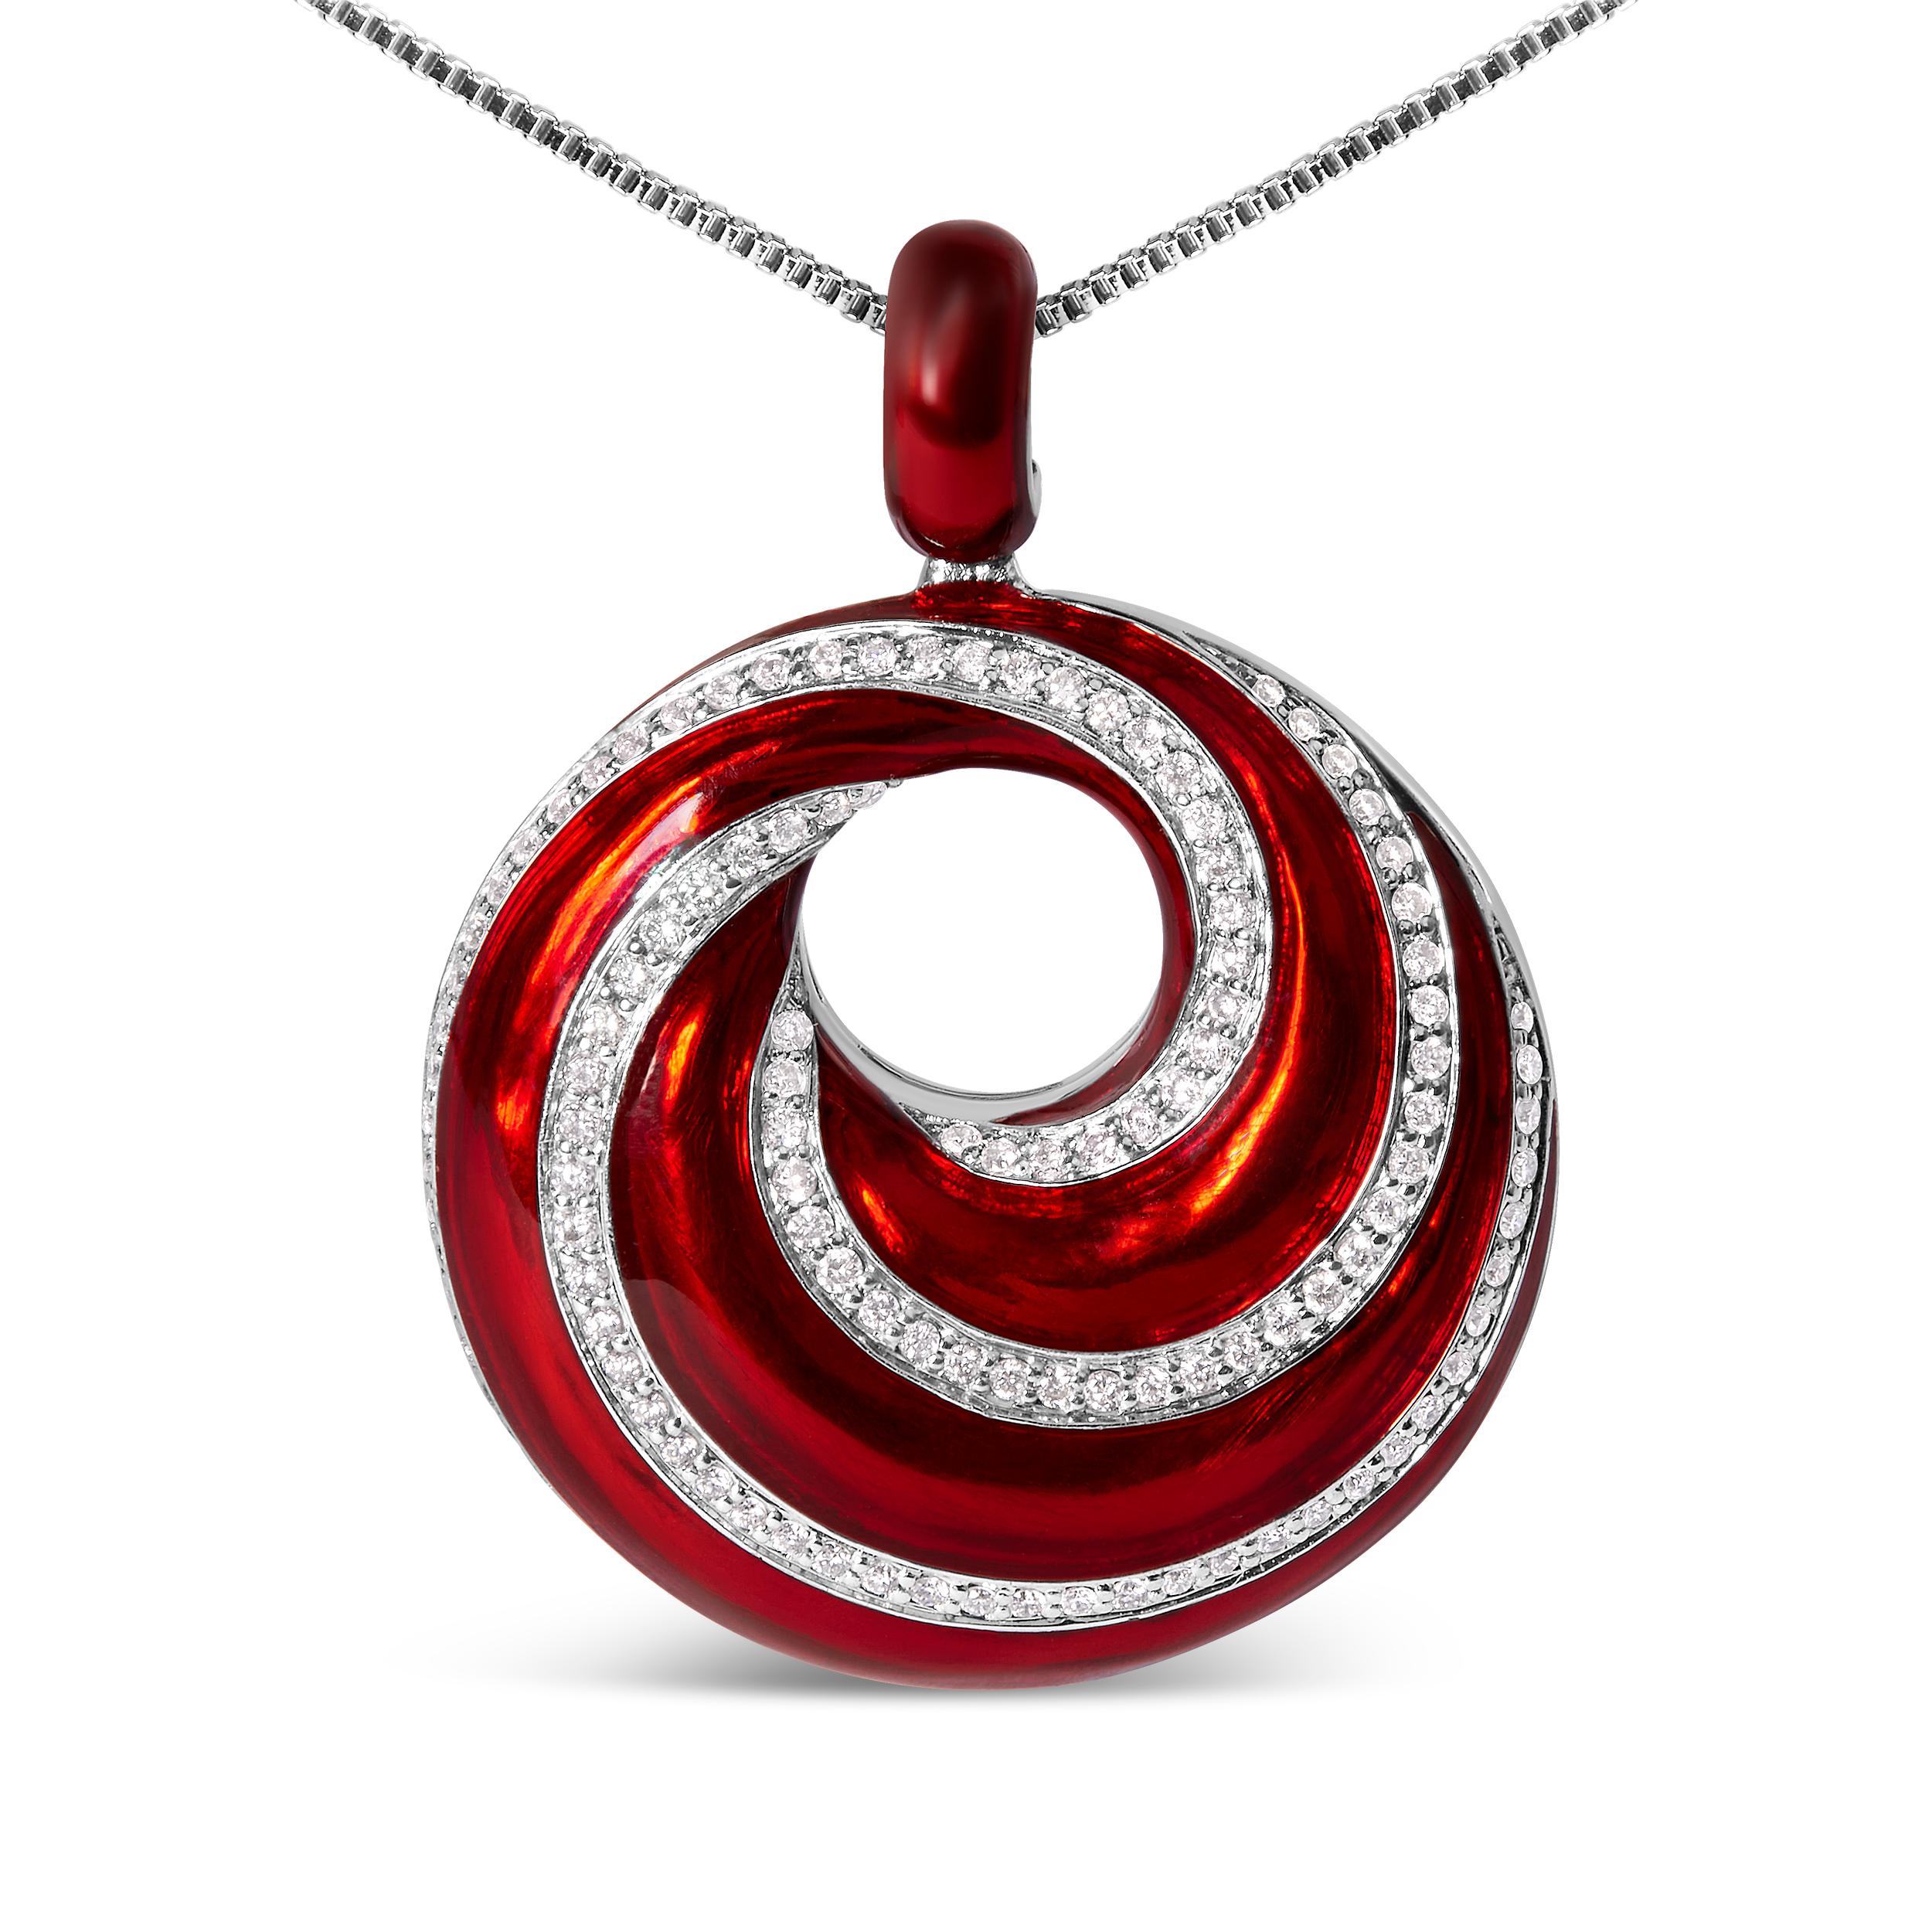 Introducing a stunning piece of jewelry that will take your breath away. This .925 sterling silver pendant necklace is designed with a red enamel swirl and adorned with 134 round diamonds, totaling 0.50 cttw. The diamonds are carefully selected for